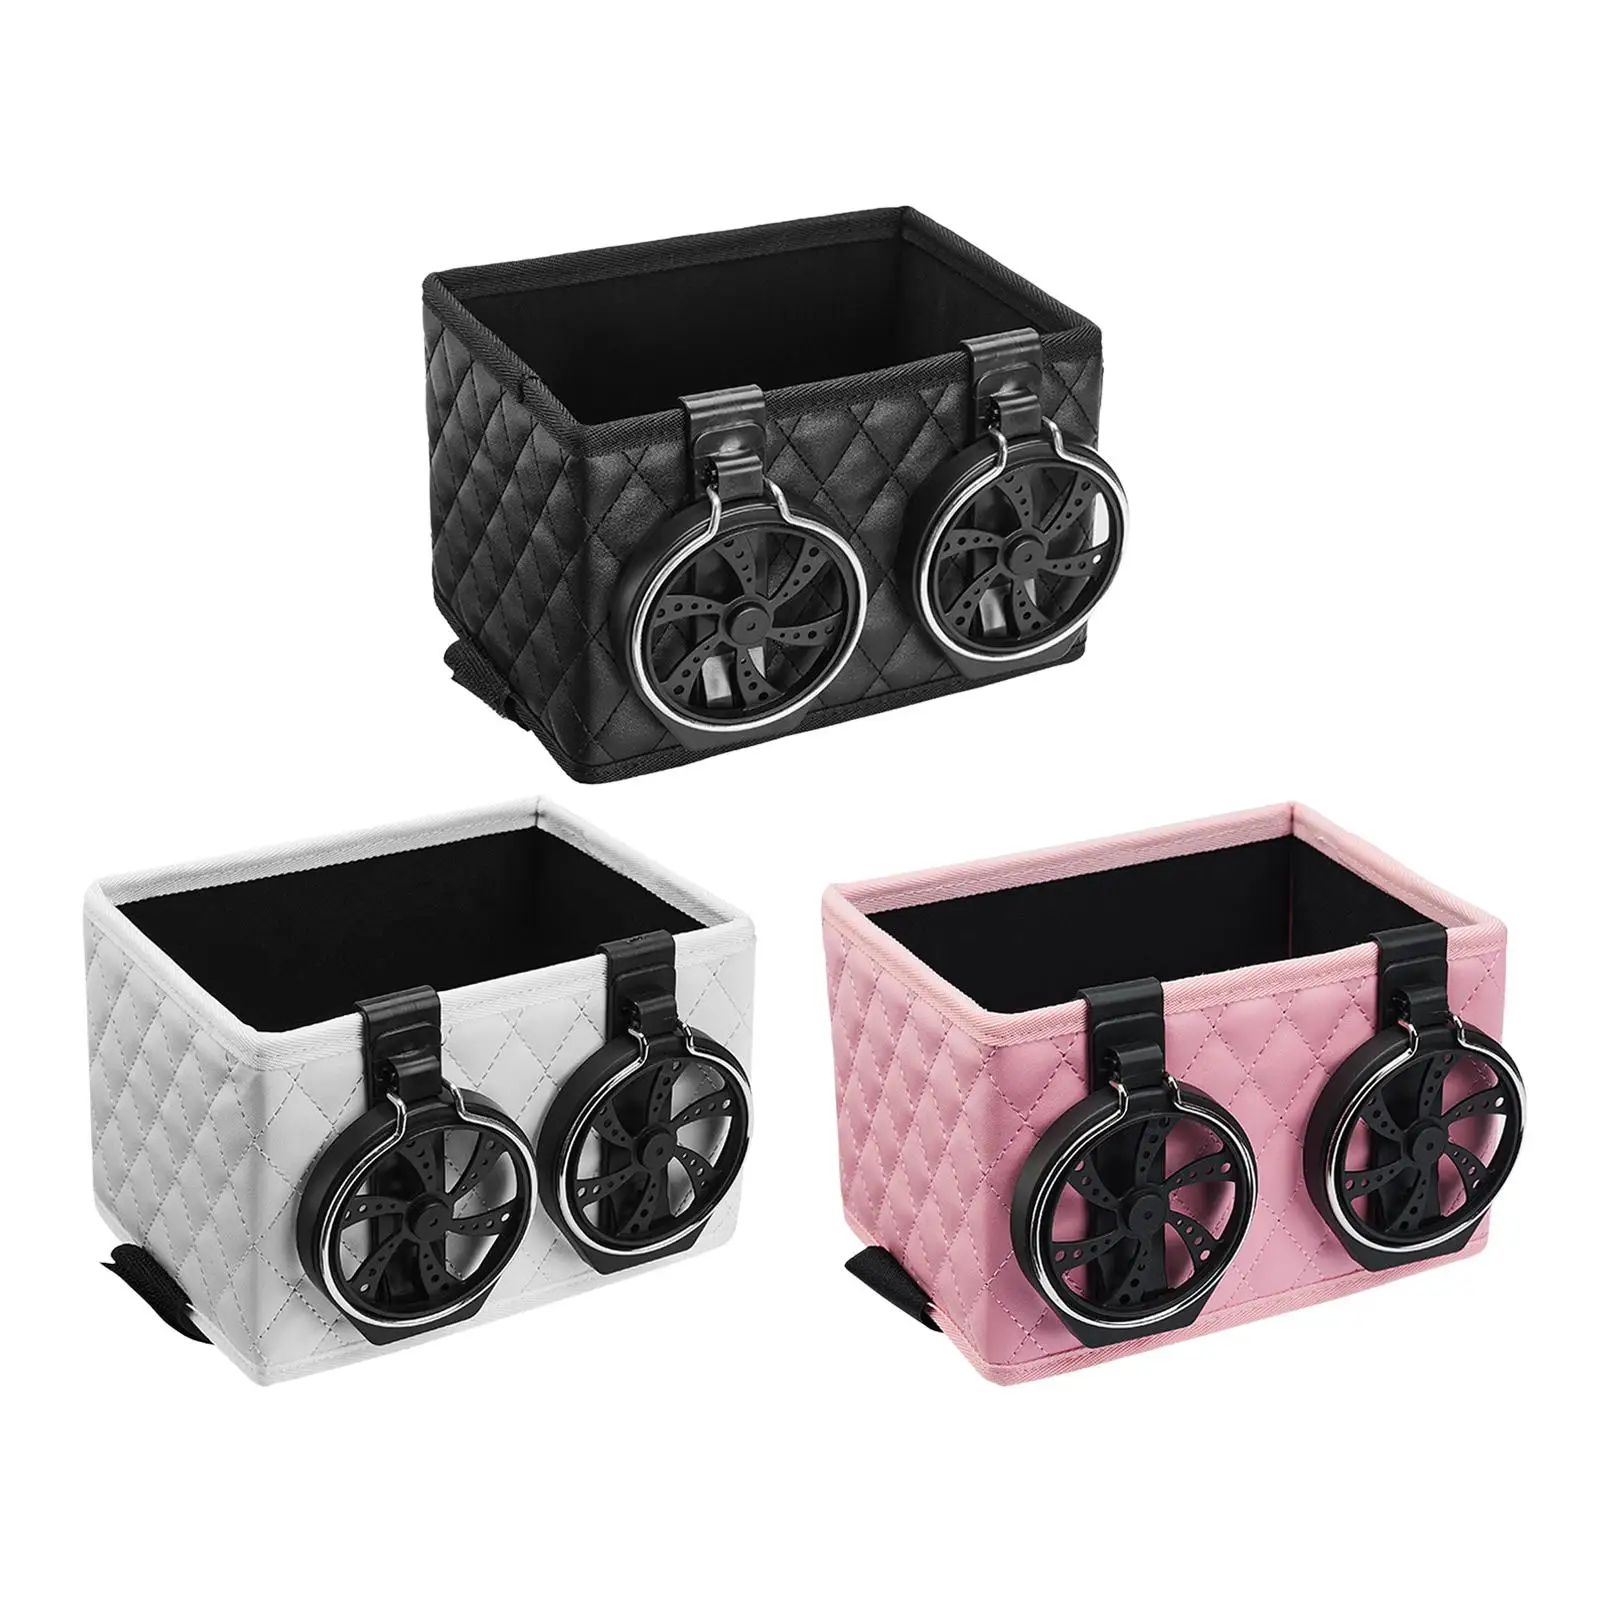 Water Cup Holder car Storage car Console Foldable 2 in 1 Car Storage Box Storage Rack for Cellphones Water Cup